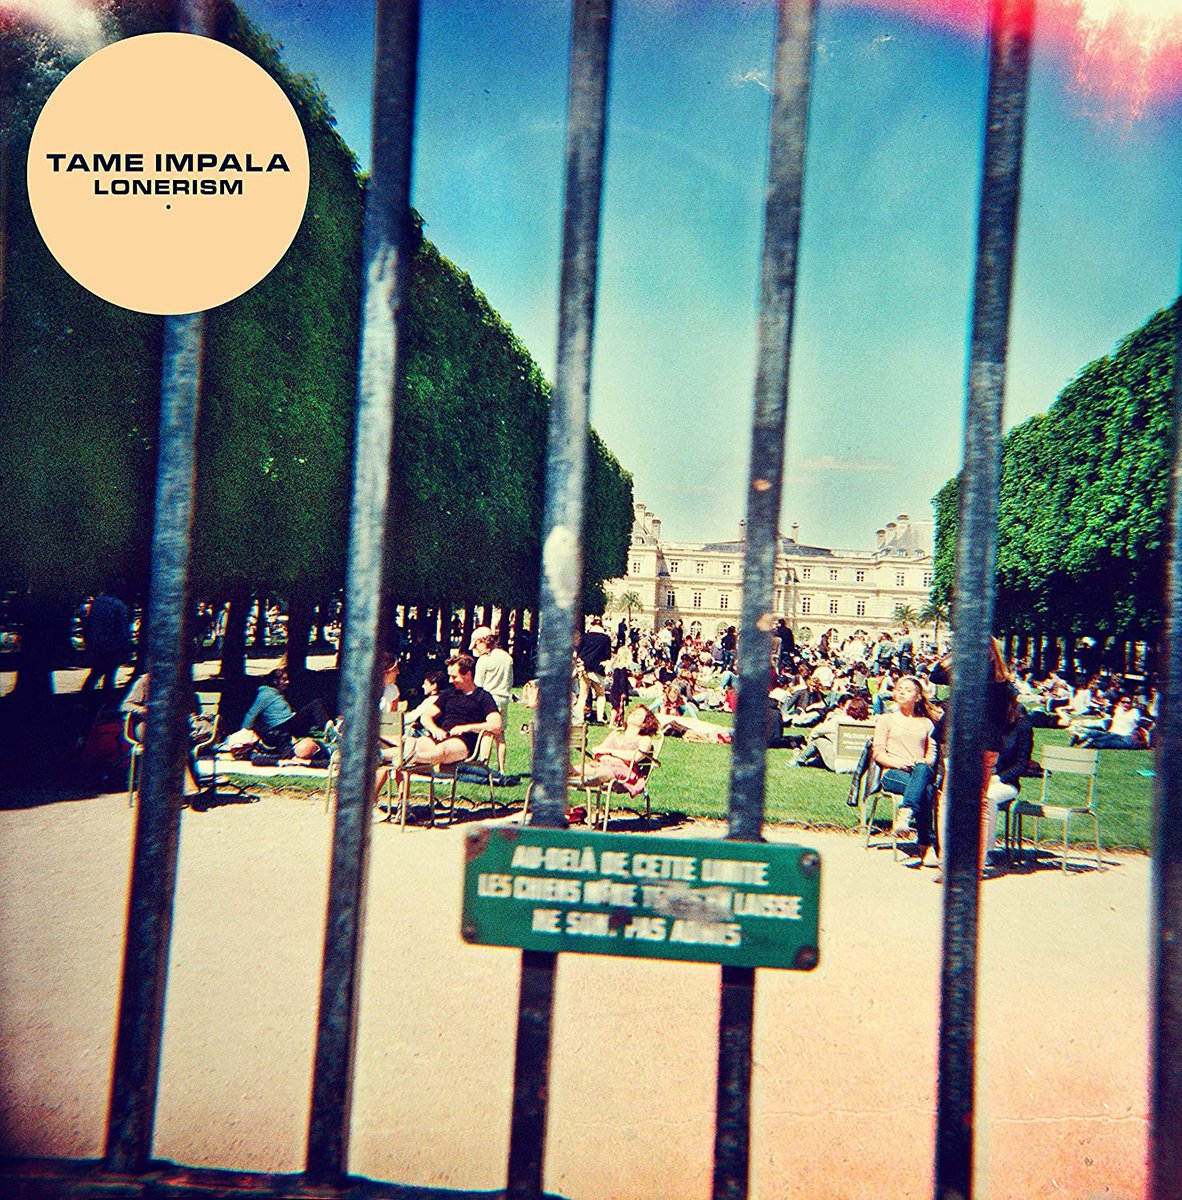 Album 2: Lonerism (2012) His most critically acclaimed album and my favourite, lonerism is still psychedelic rock/ neo psychedelia but it is more synth heavy. It perfectly merges synth and rock tones, giving very colourful production and a more psychedelic yet more pop sound